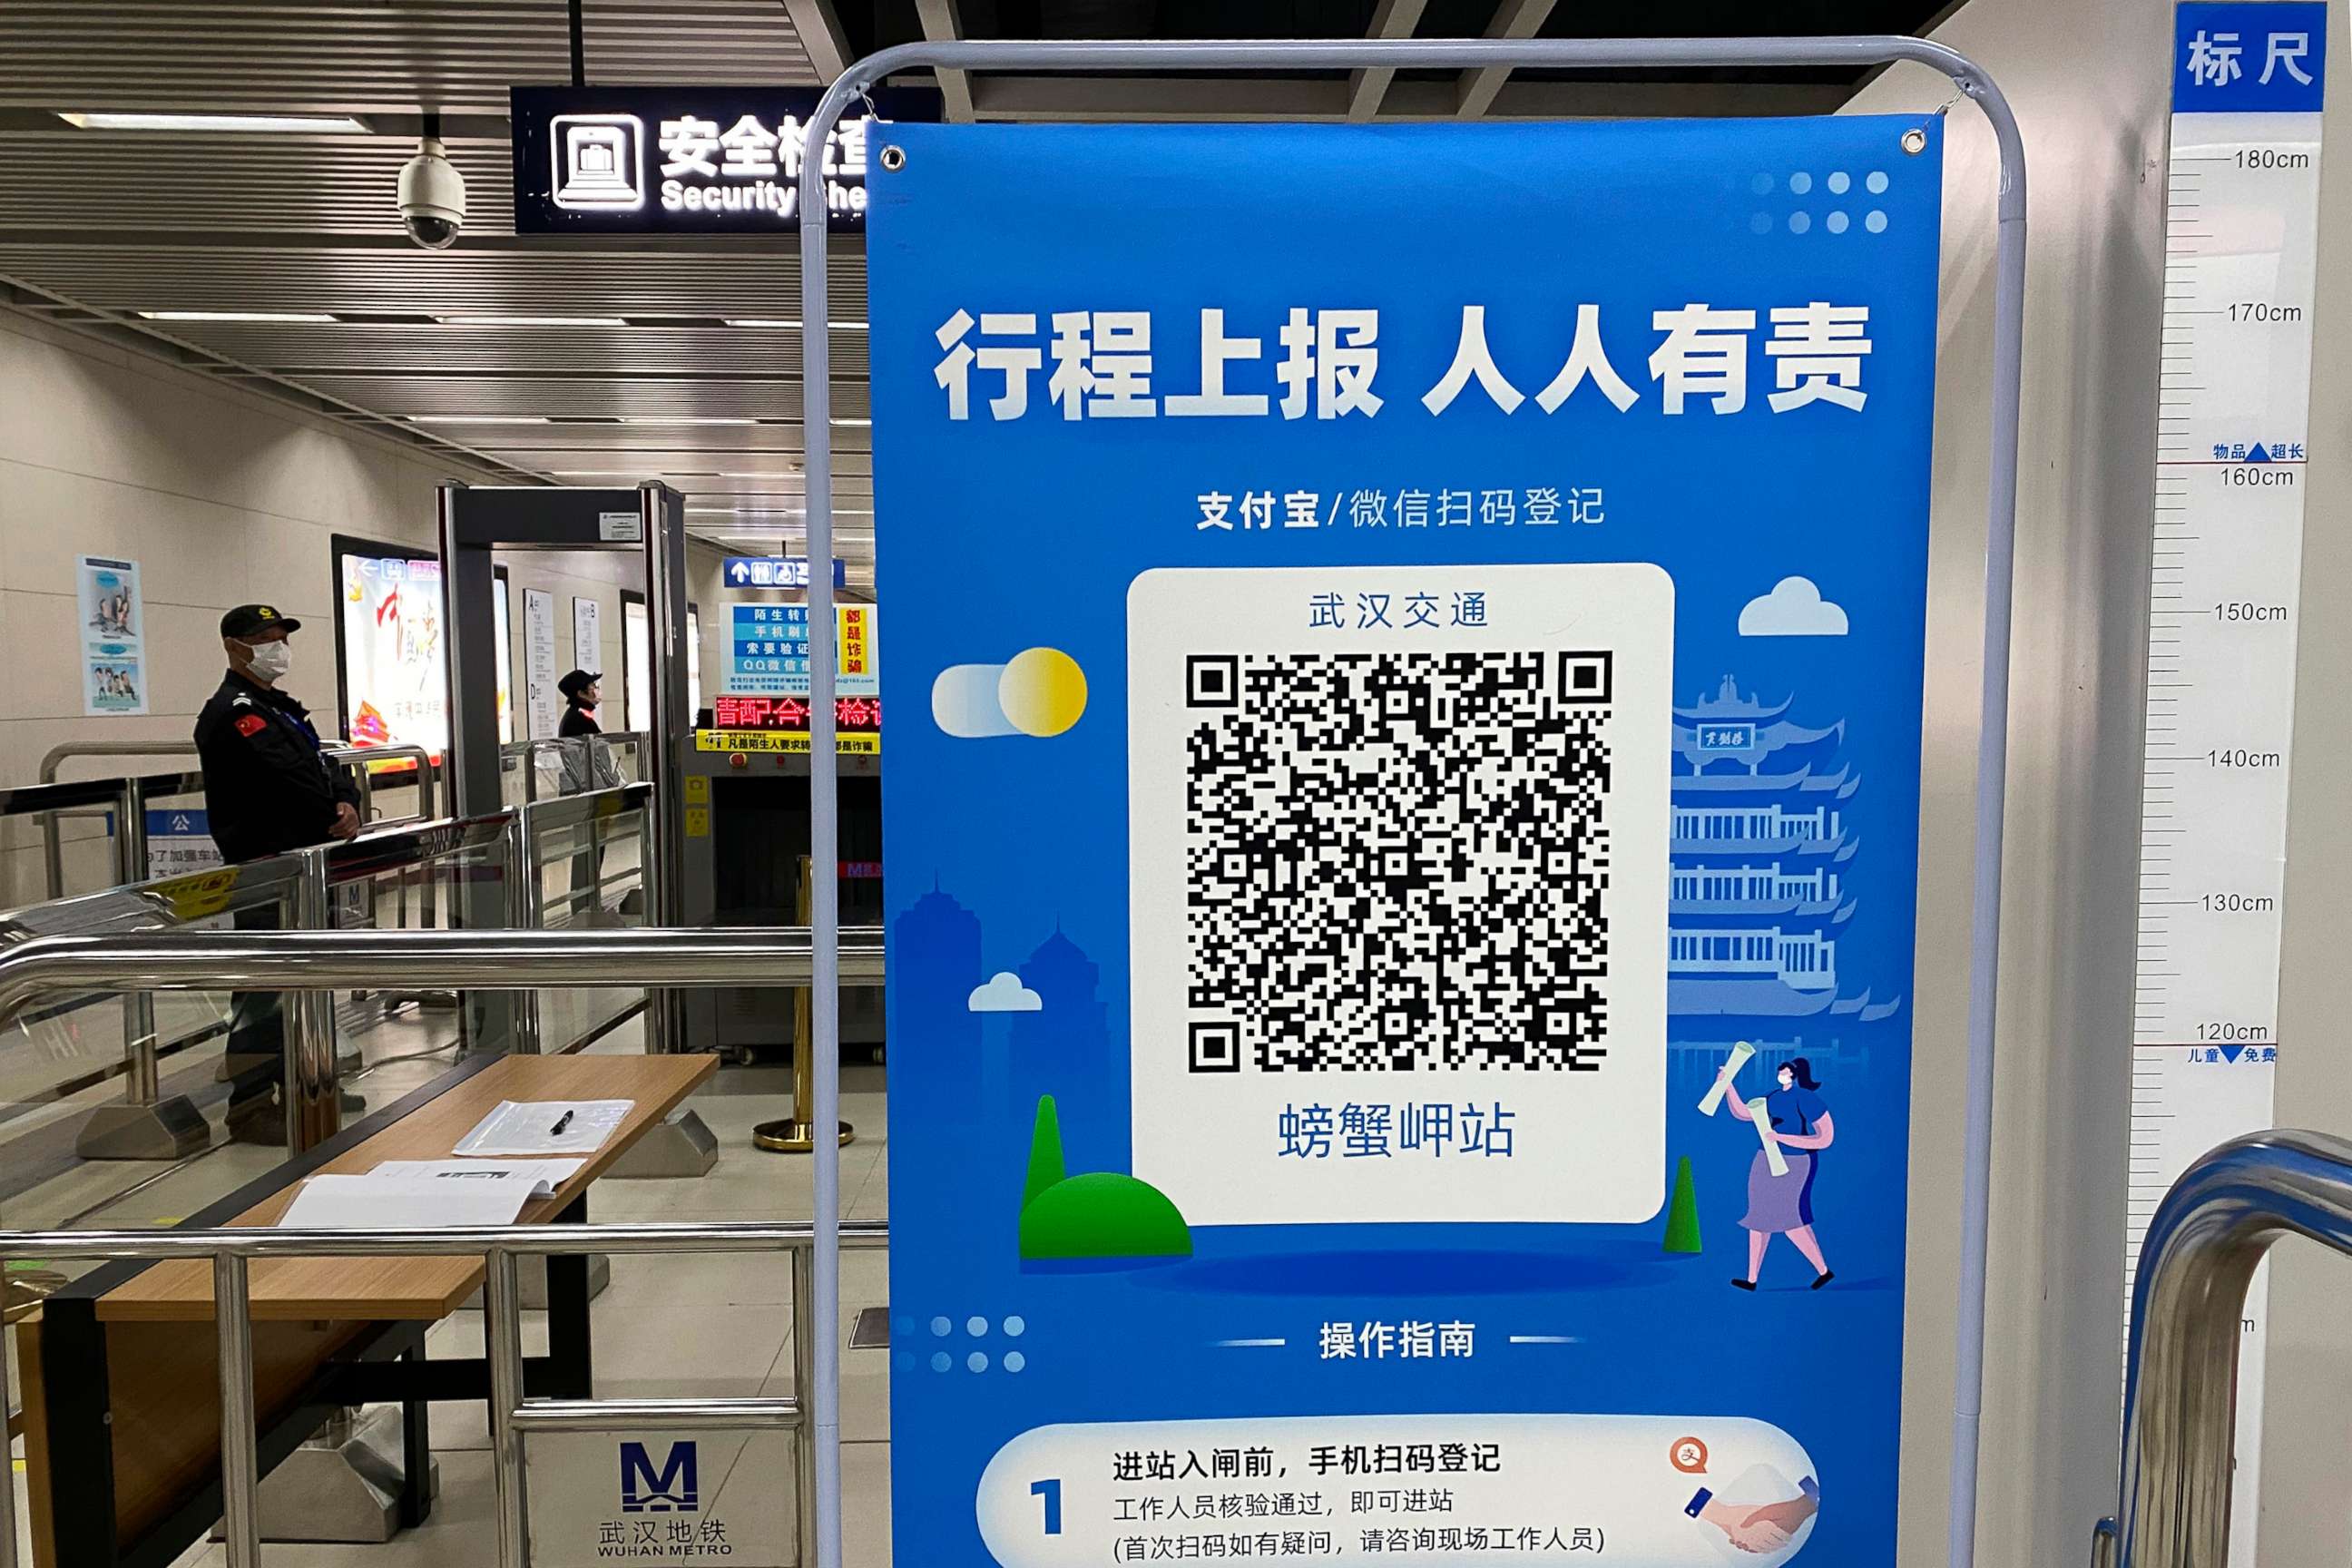 PHOTO: In this April 1, 2020, file photo, a QR code is set up for passengers to check their green pass status at a subway station in Wuhan in central China's Hubei province.